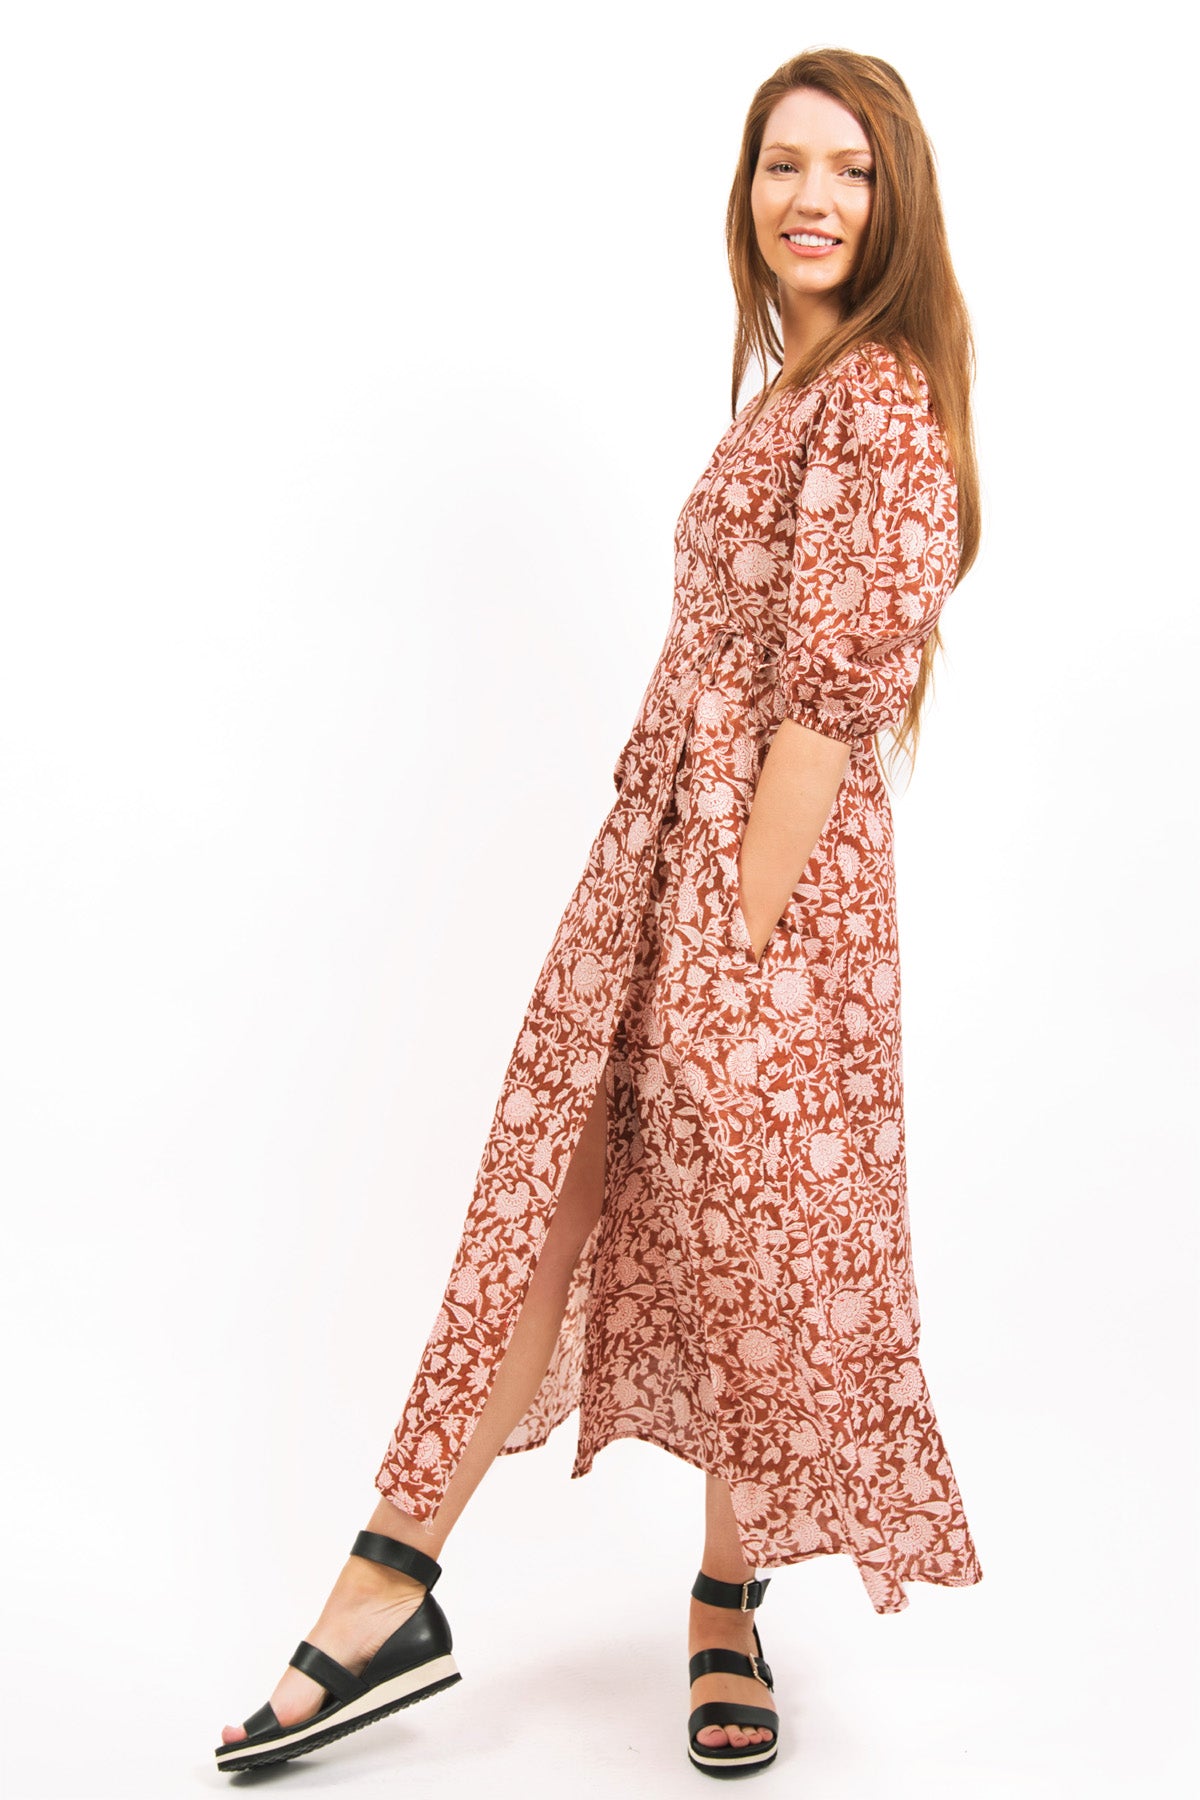 SIDE VIEW OF MODEL WEARING ZEPHYR PRINTED WRAP MAXI DRESS -IN AMBER COLOUR- zoha online